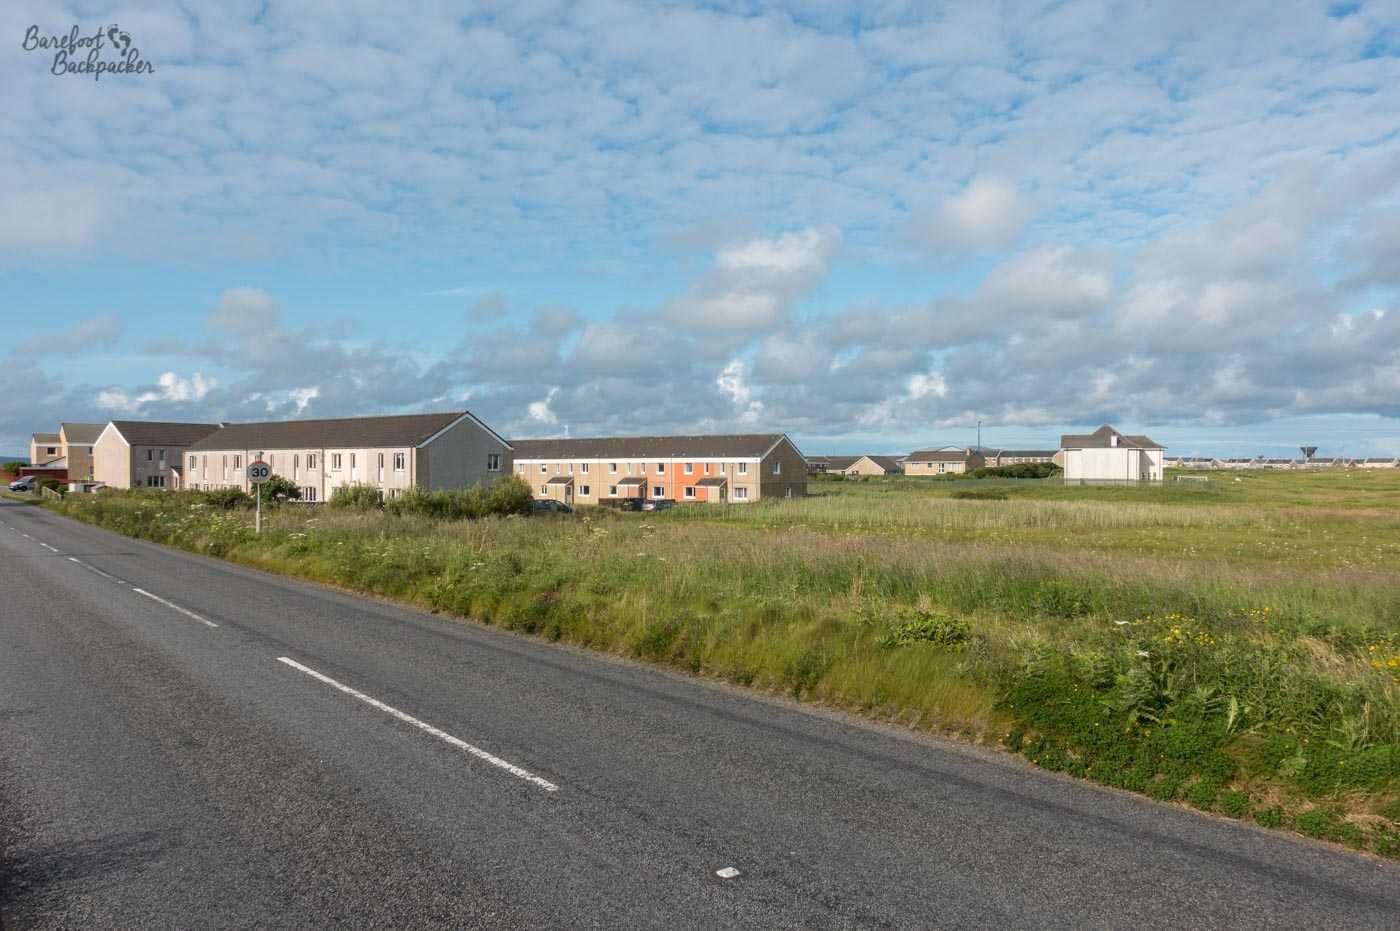 The terraced homes on Benbecula that presumably serve as military housing.